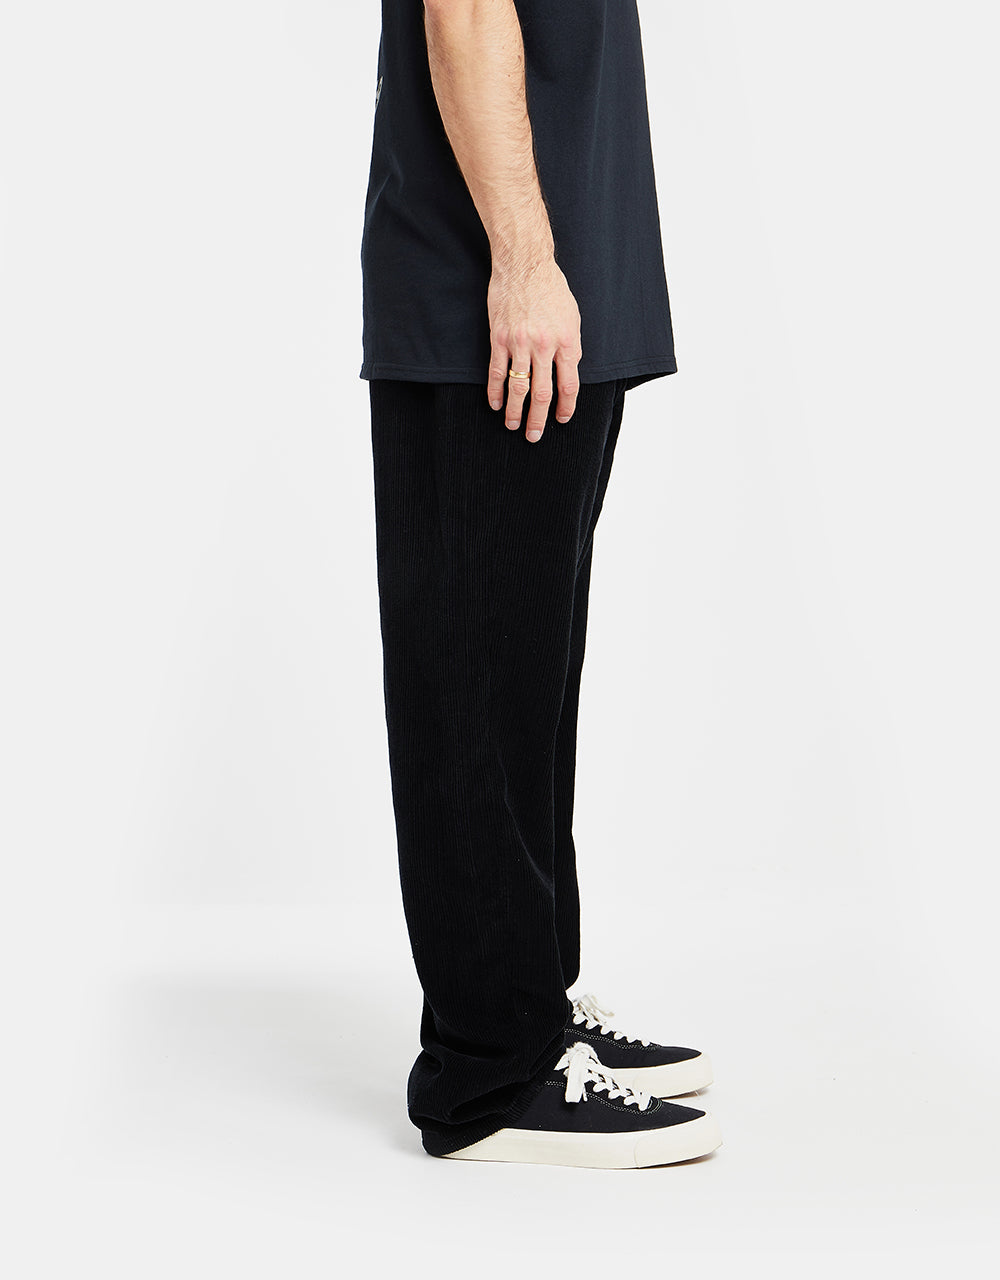 Route One Relaxed Fit Big Wale Cords - Black